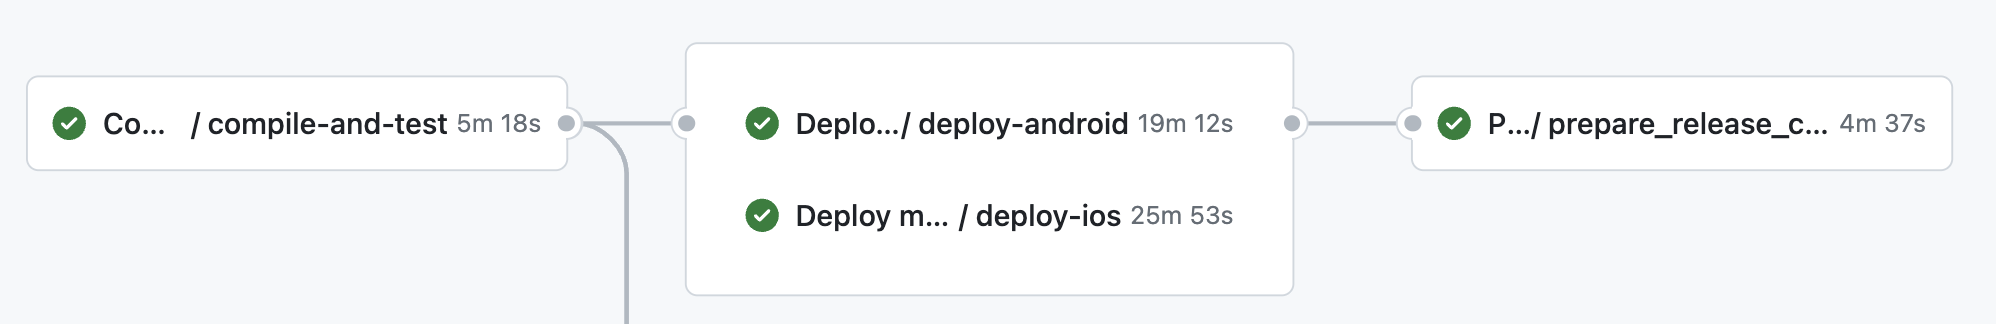 Github workflow that builds and deploys